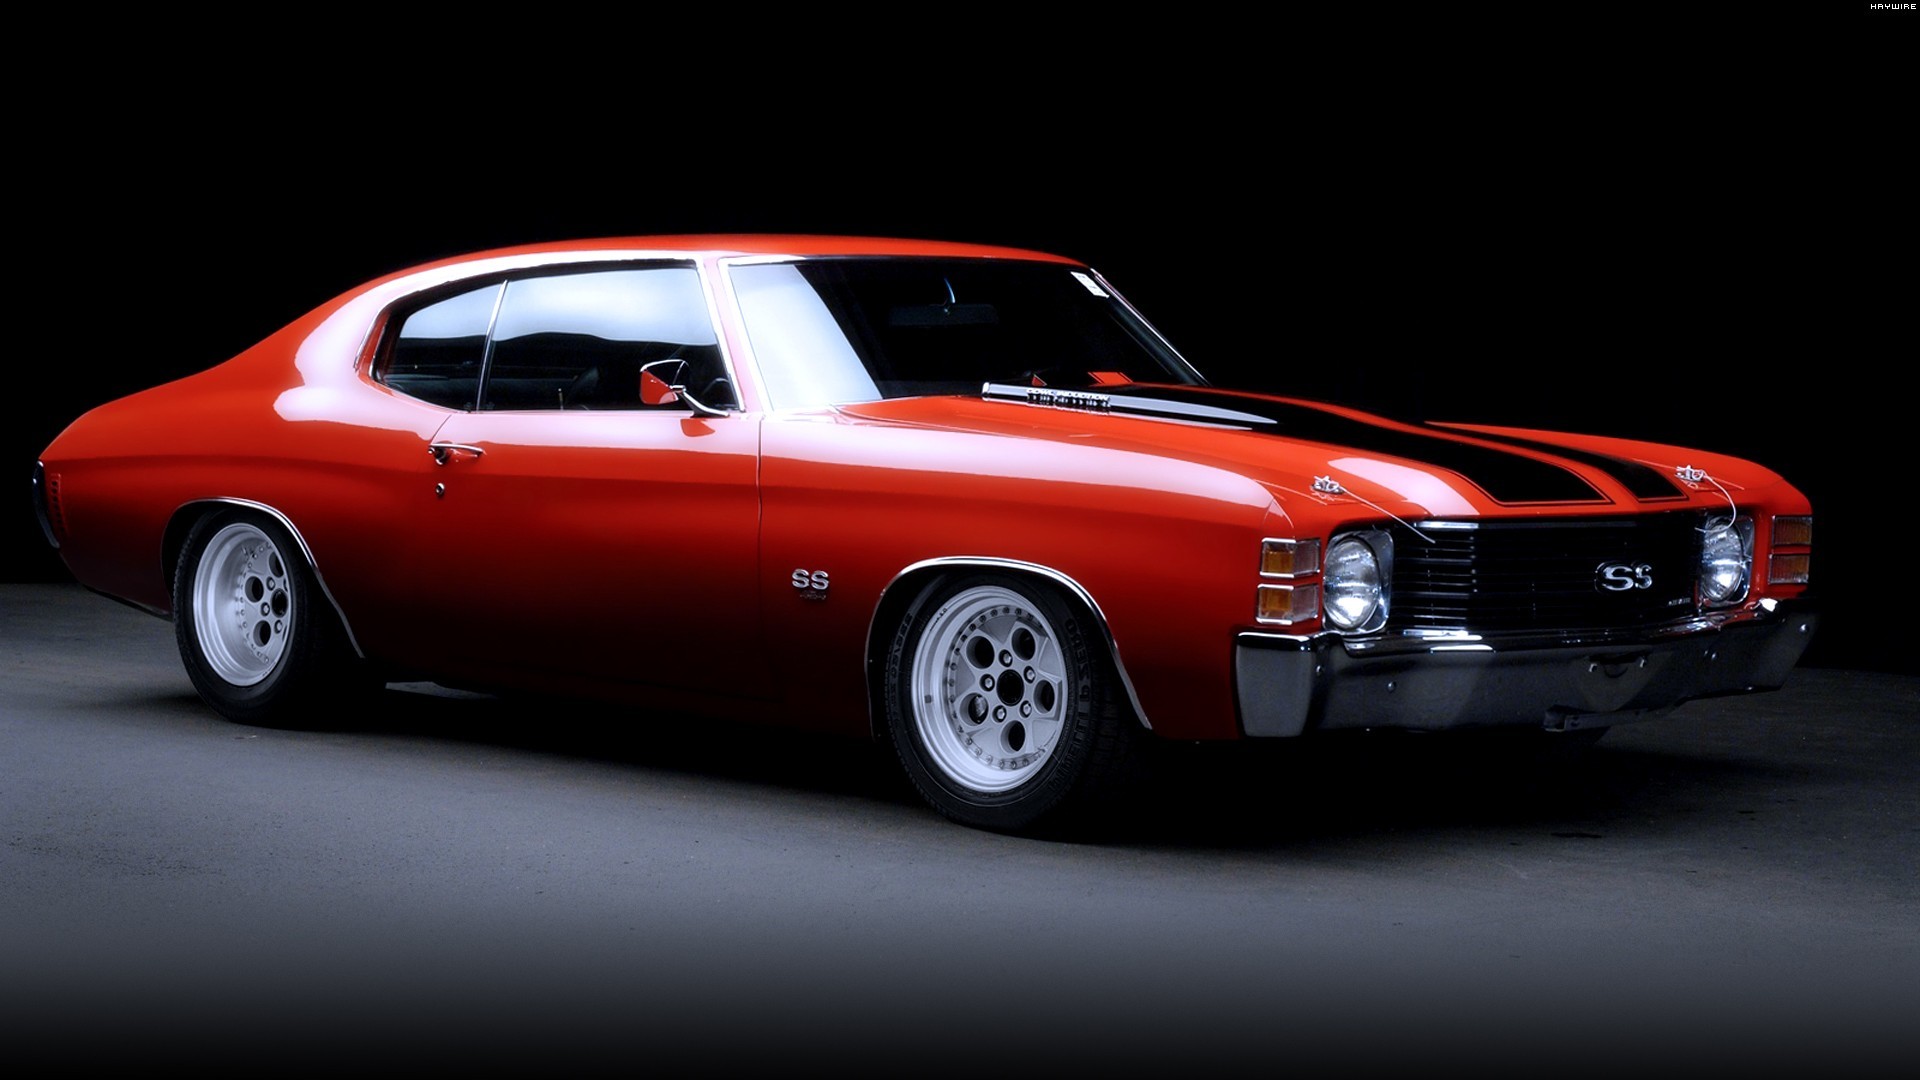 1920x1080 Red And Black Muscle Cars 12 High Resolution Wallpaper. Red And Black Muscle  Cars 12 High Resolution Wallpaper.  ...